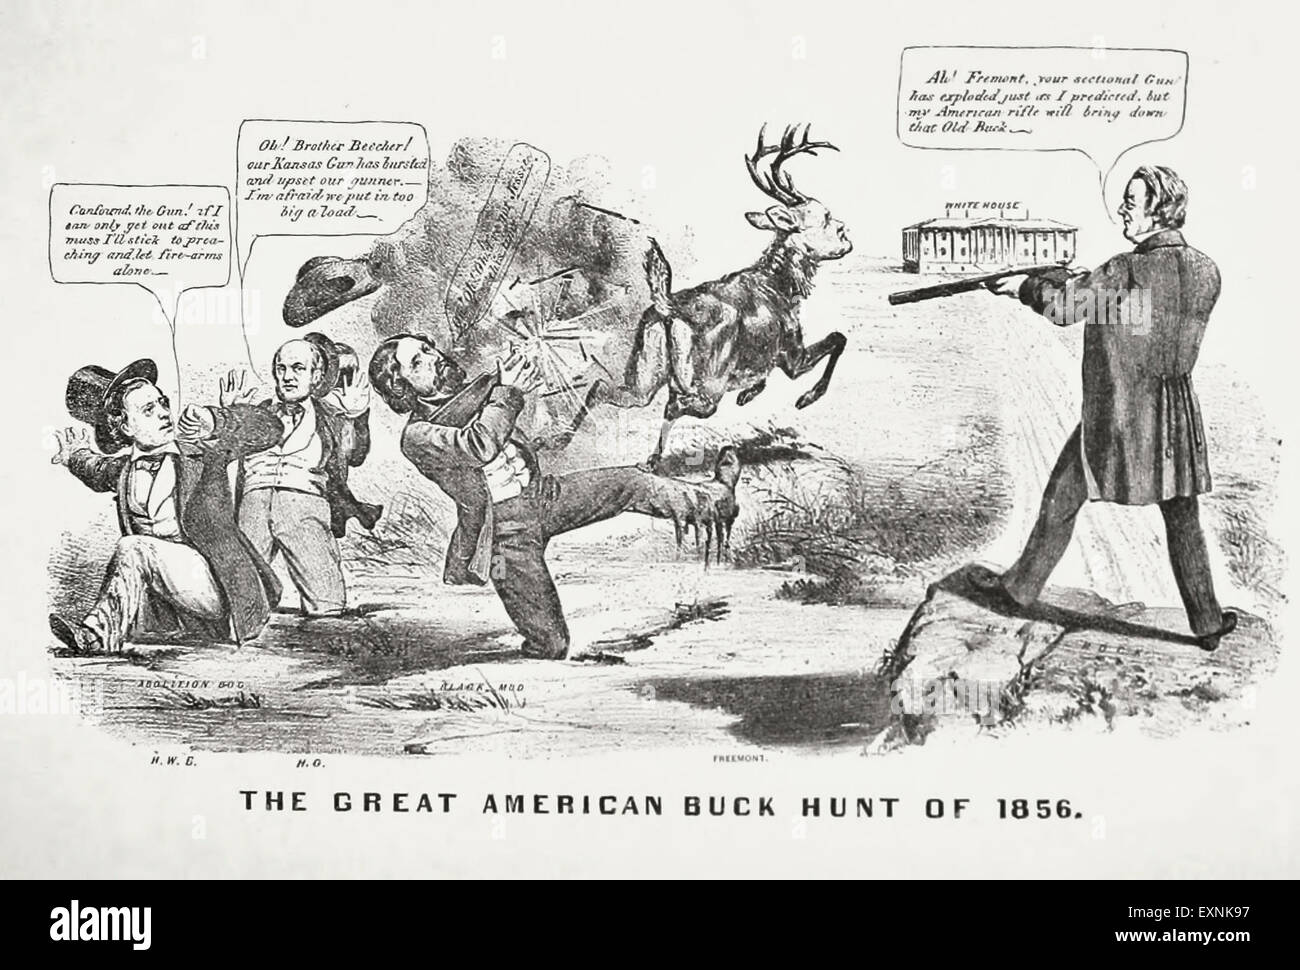 The Great American Buck Hunt of 1856 - American Party Presidential candidate Millard Fillmore attacking Republican Candidate John Fremont and Democratic Candidate James Buchanan.  Fremont's gun, A Beecher's Bible has exploded in his face, circa 1856 Stock Photo